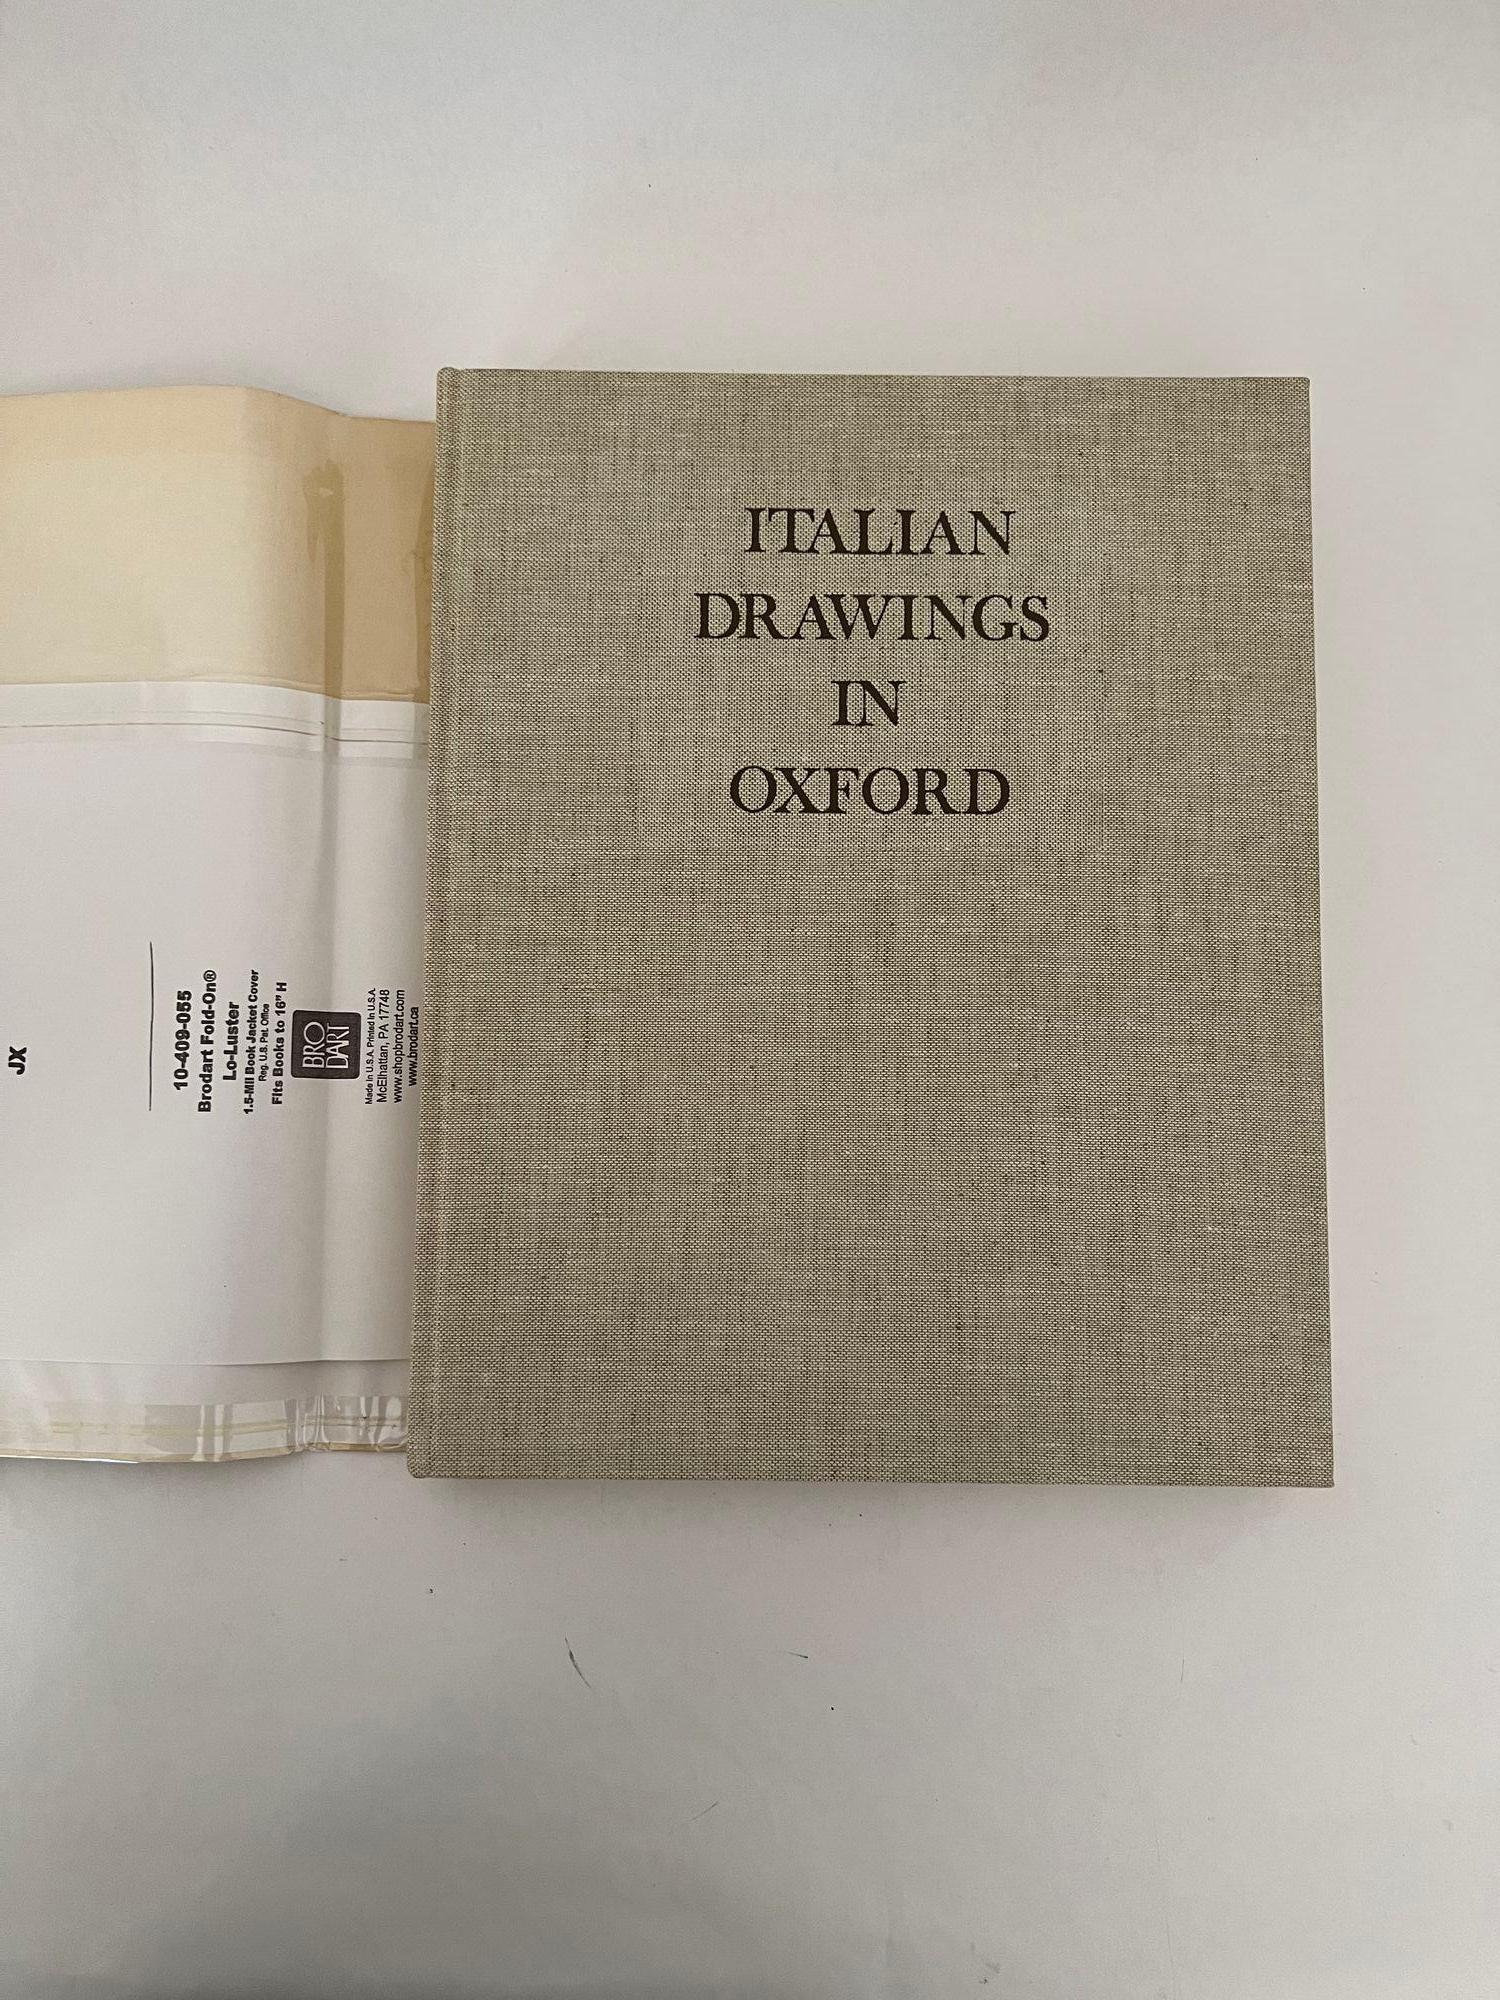 Baroque Italian Drawings In Oxford by Terisio Pignatti, First English Publication, 1977 For Sale